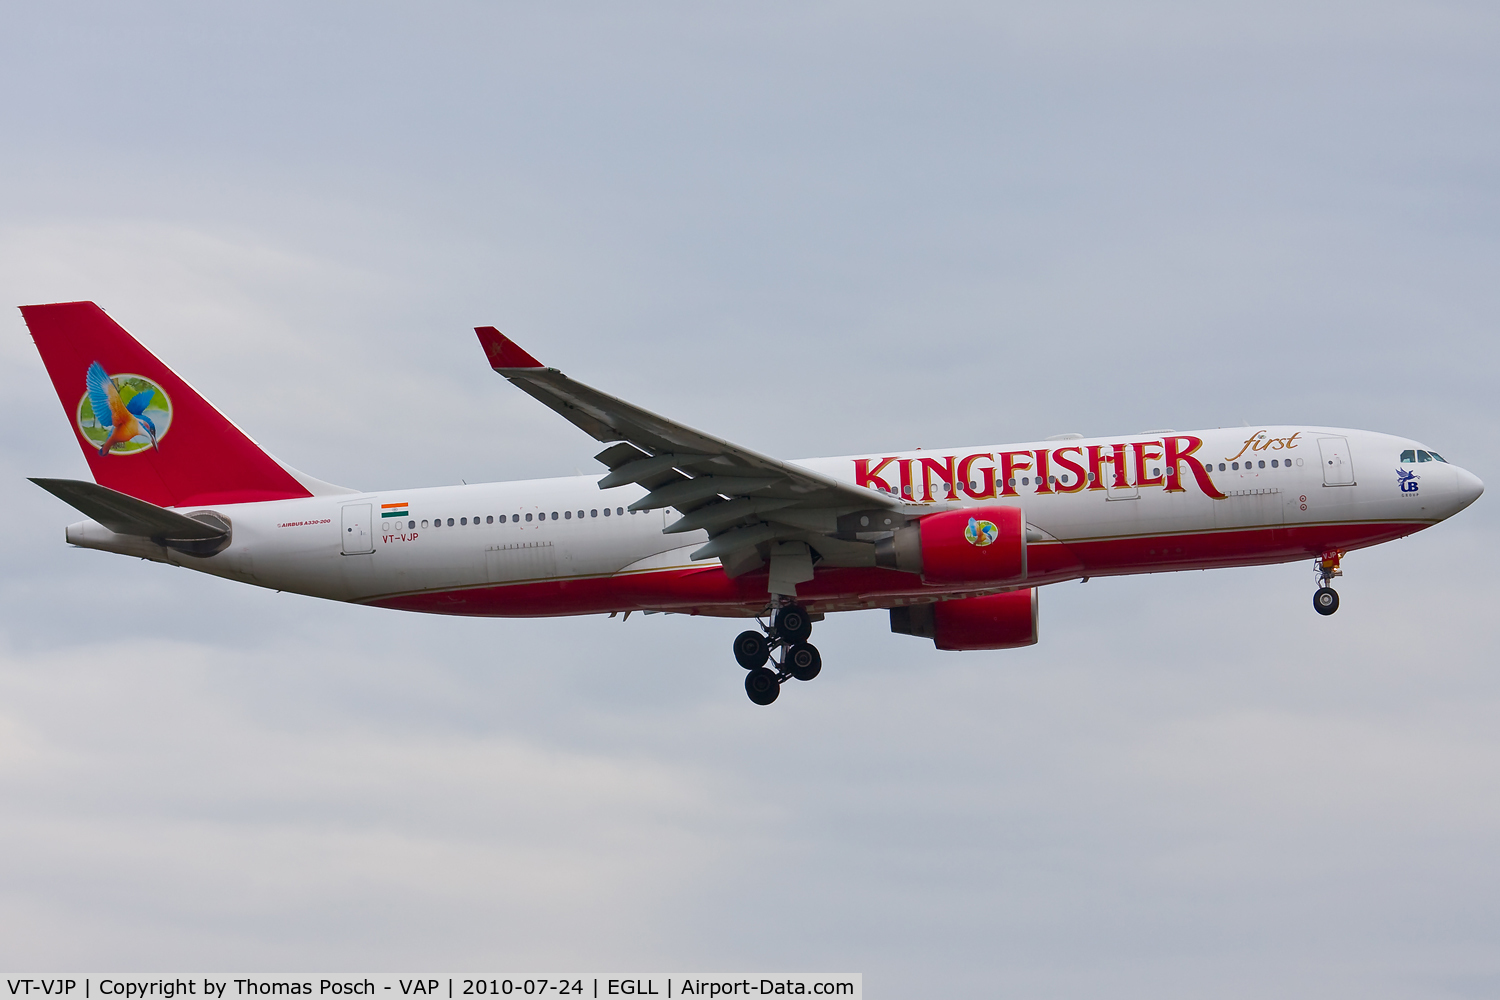 VT-VJP, 2008 Airbus A330-223 C/N 946, Kingfisher Airlines